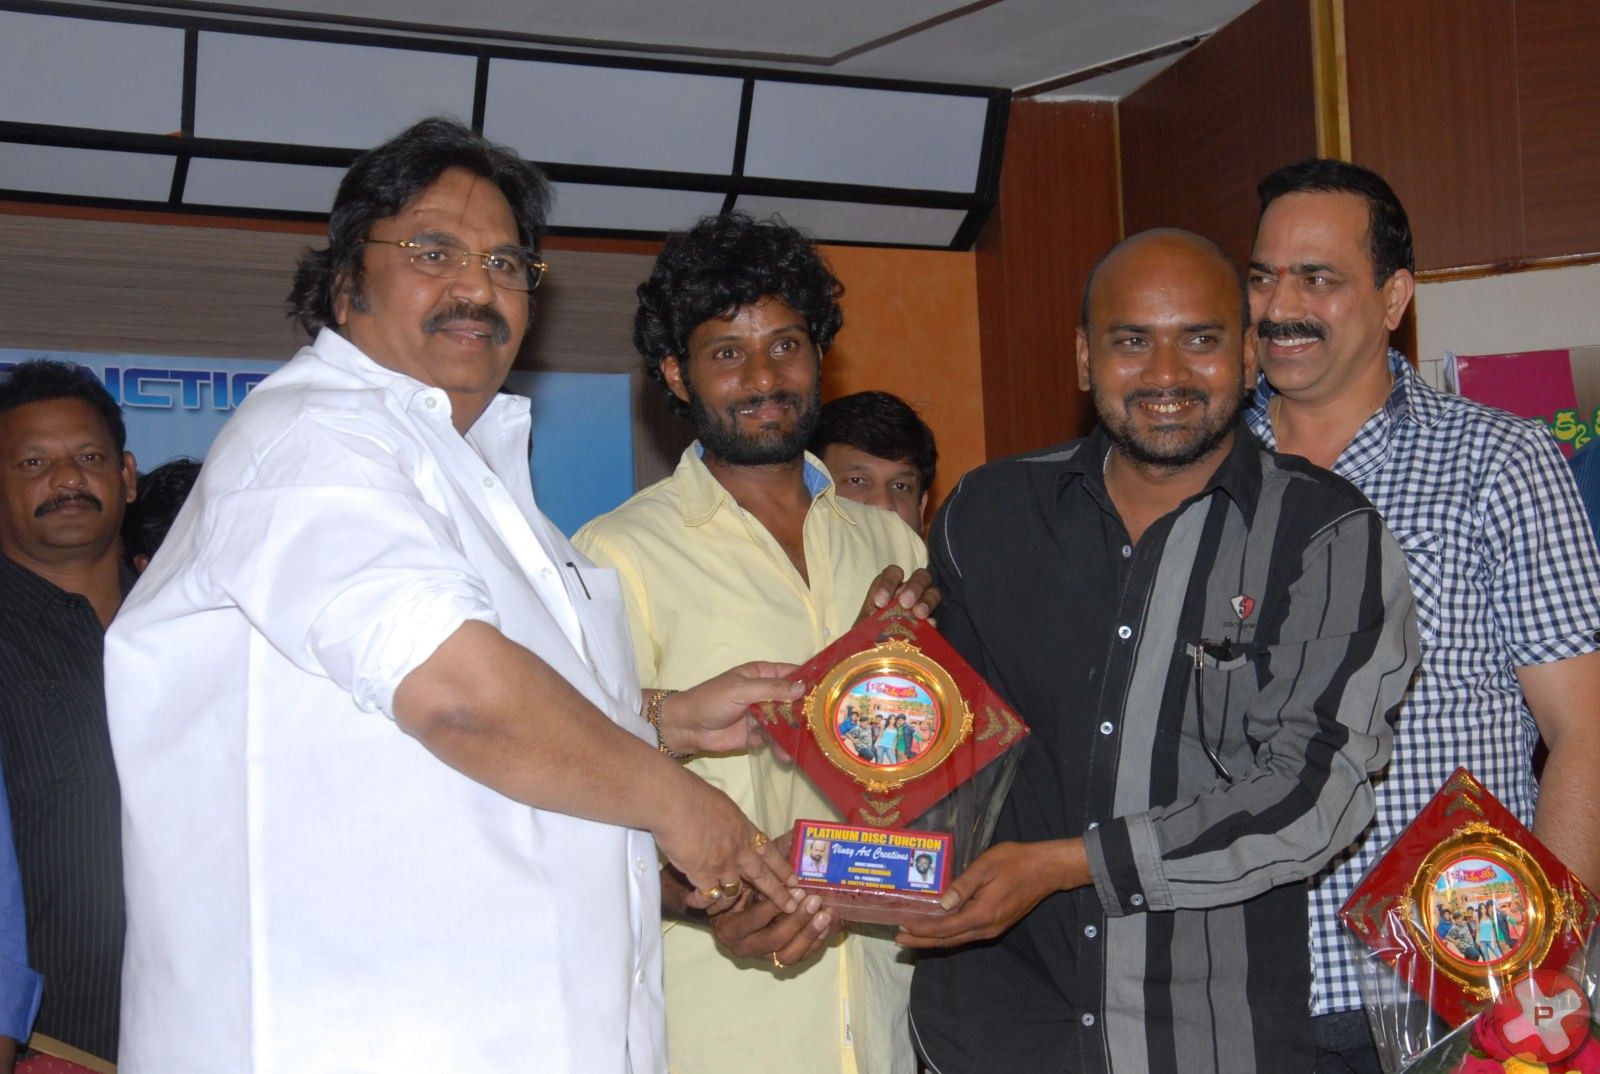 Oke Oka Chance Platinum Disc Function Pictures | Picture 383016